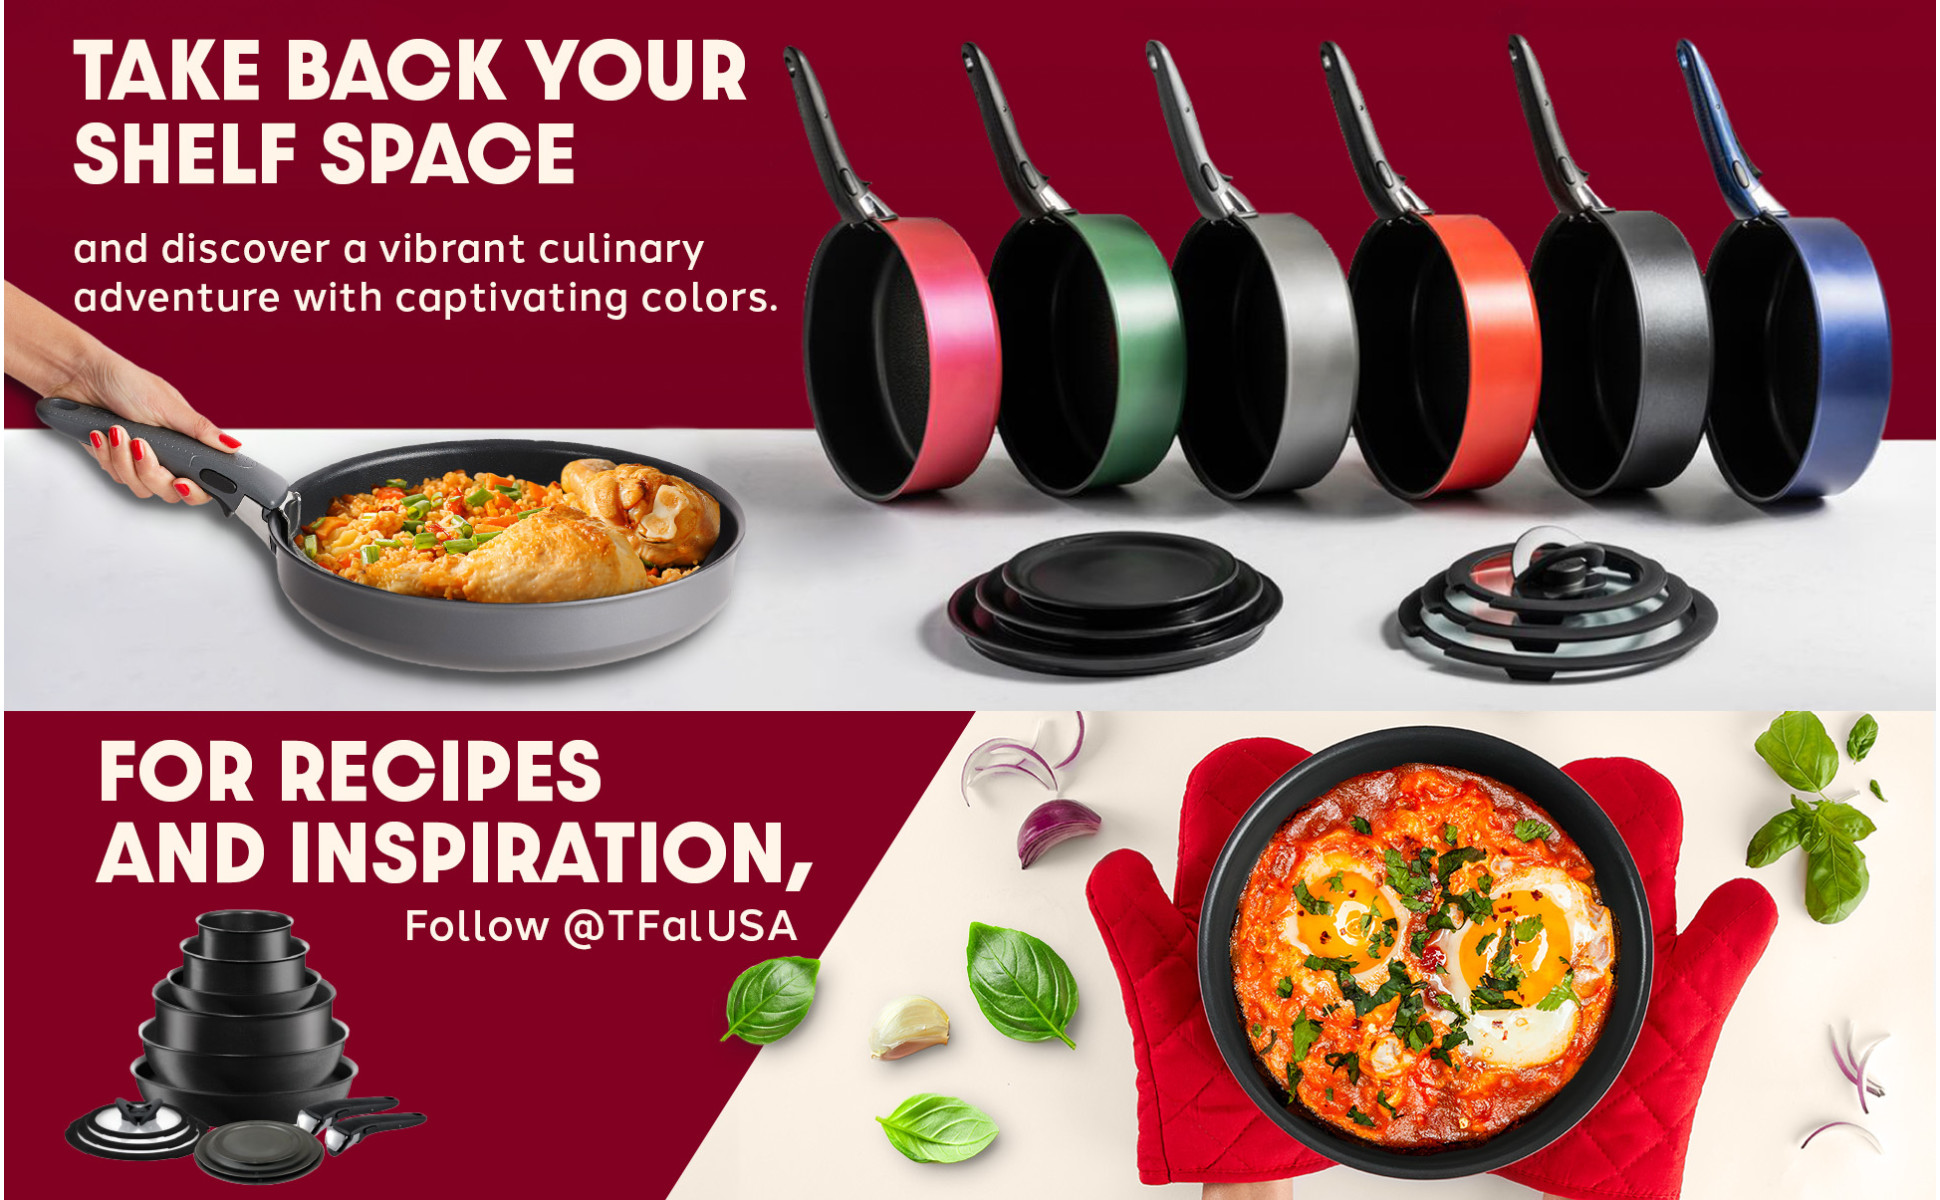 Tefal Ingenio Edition Stainless Steel Nonstick Frying Pan 3p